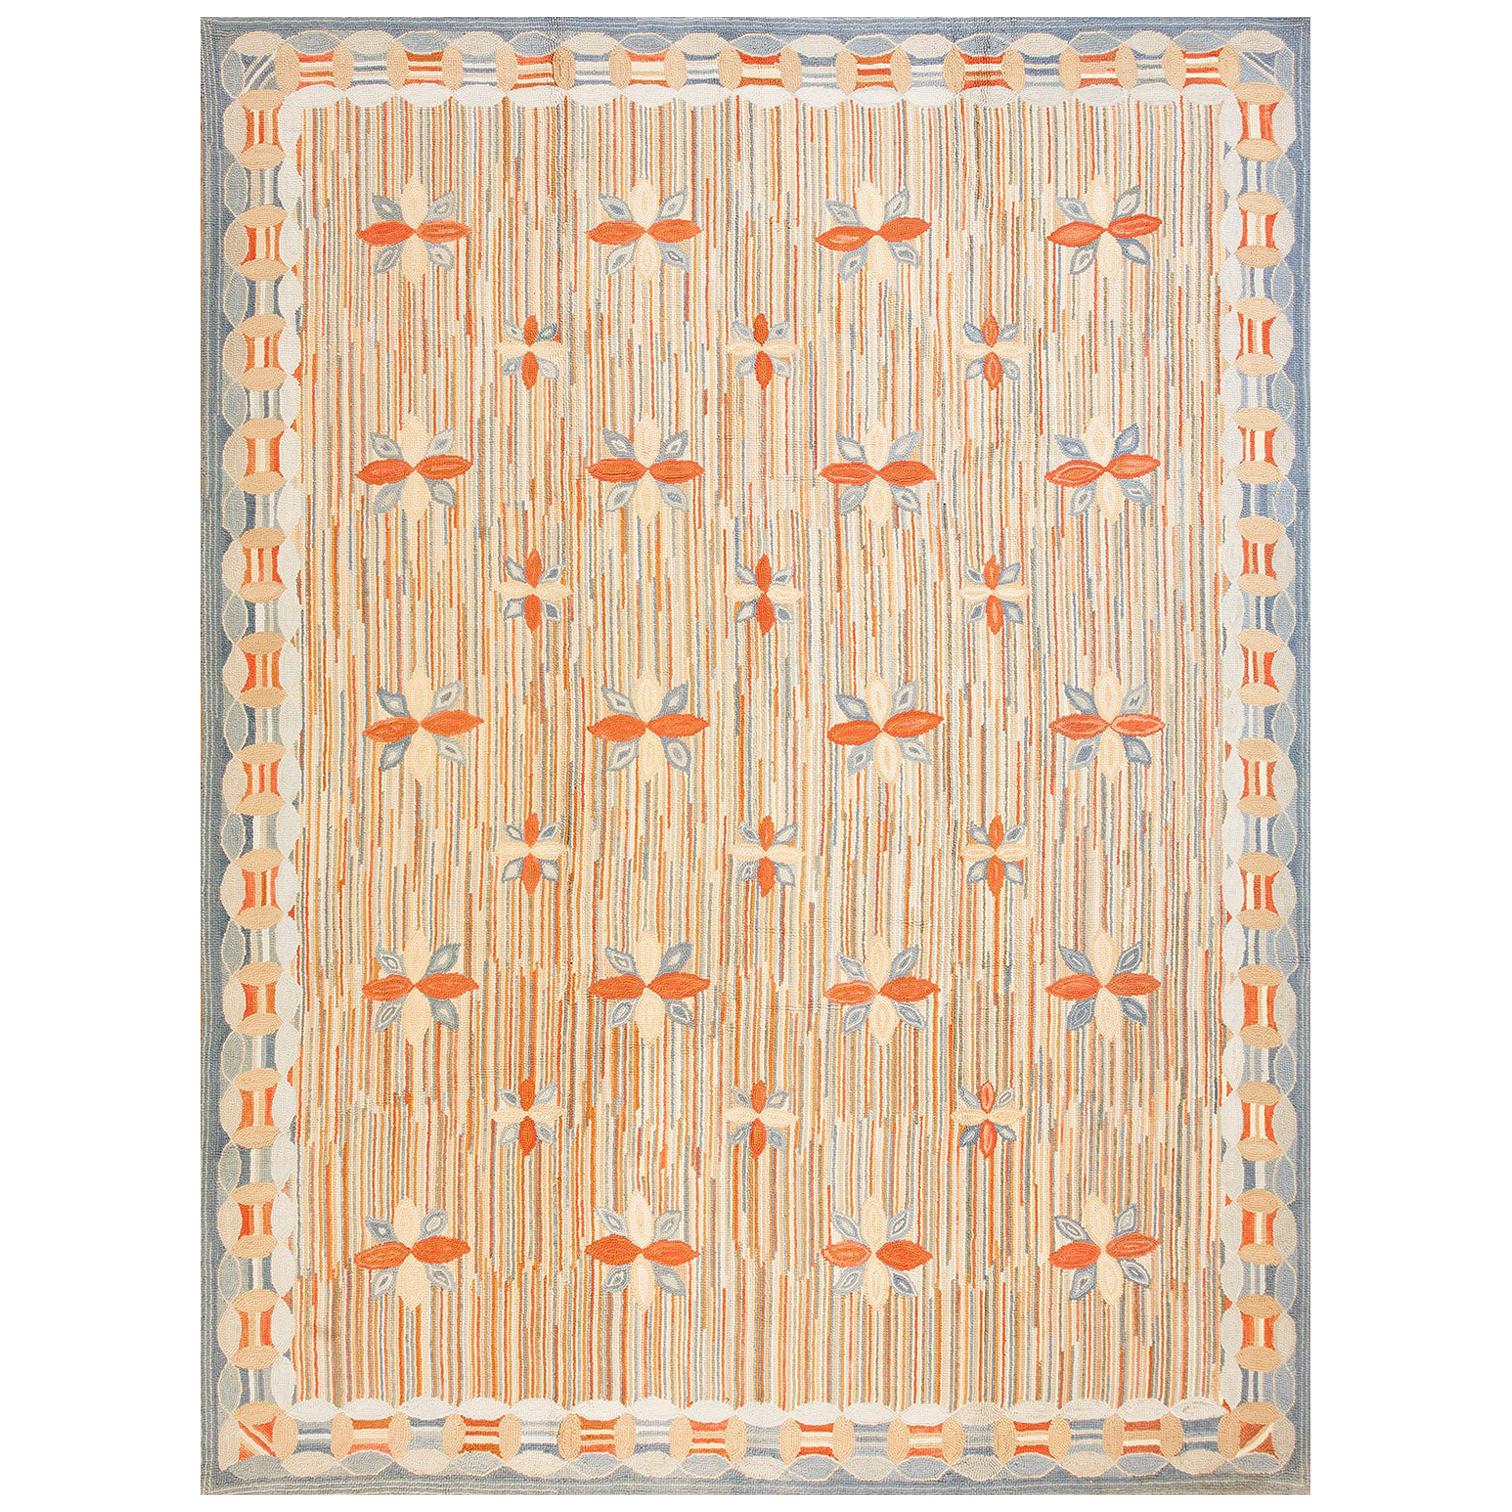 Contemporary American Hooked Rug (9' x 12' - 274 x 365 )